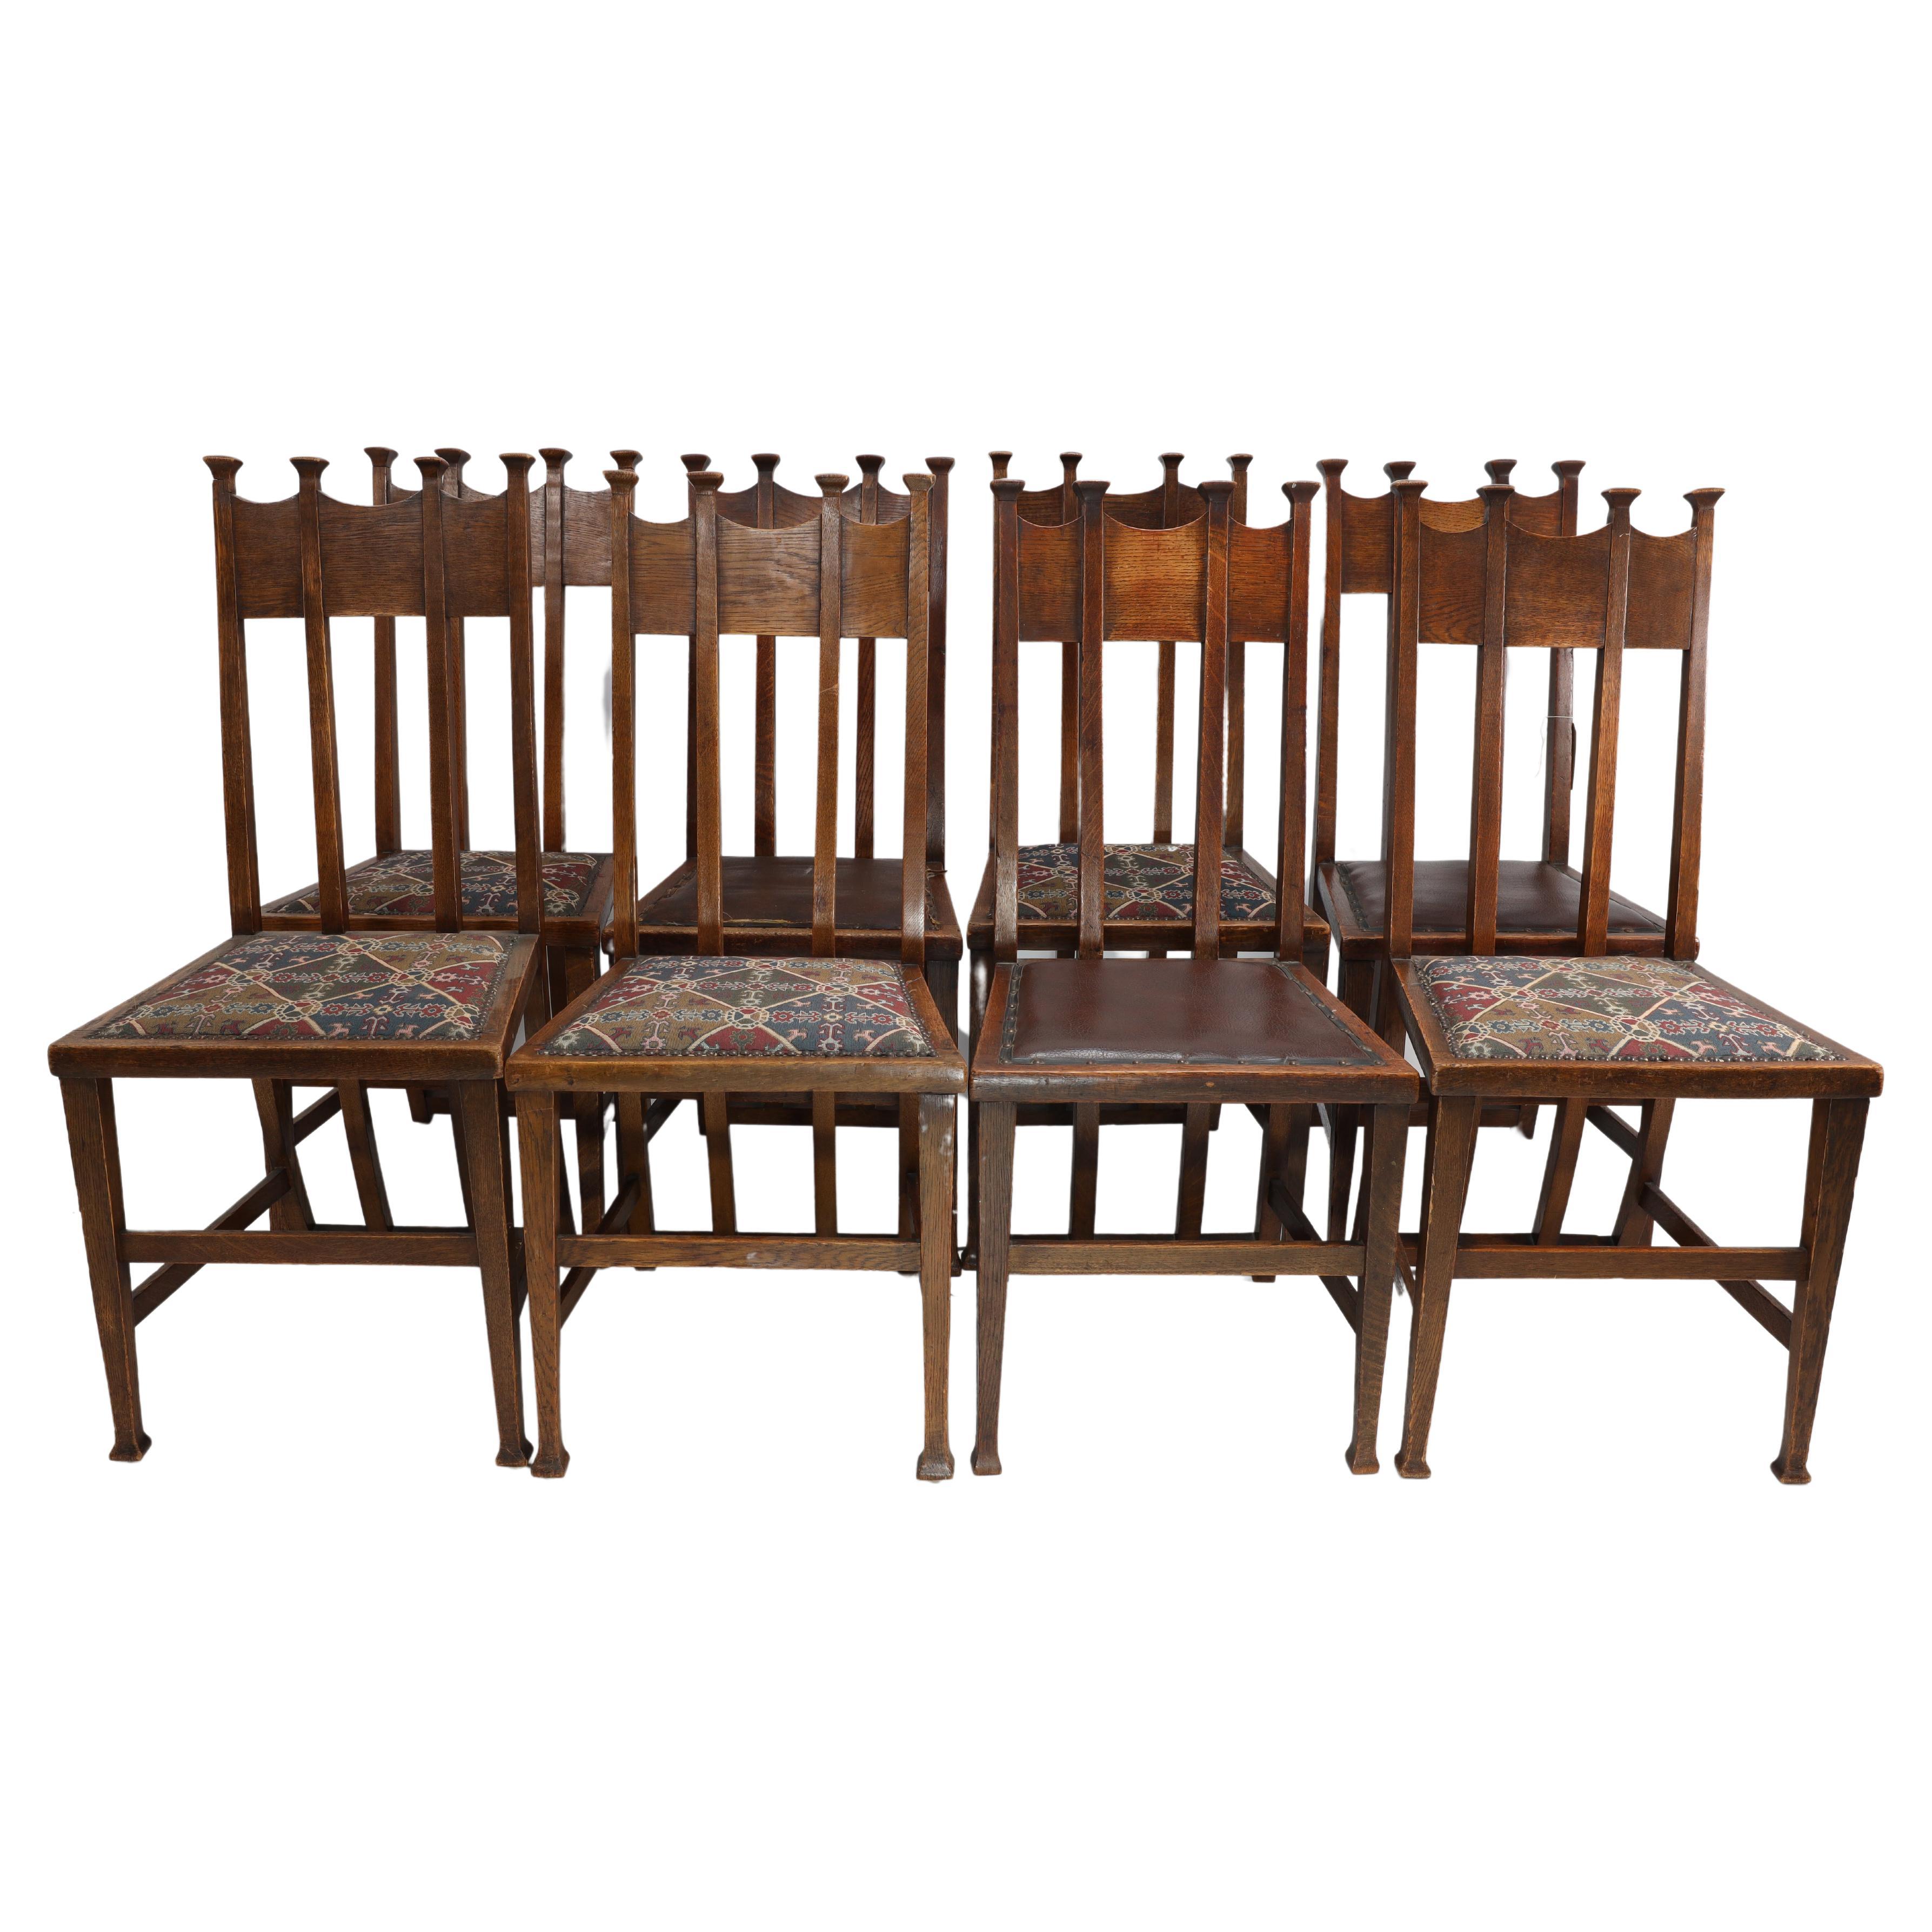 George Montague Ellwood. Made by J S Henry. A rare set of ten oak dining chairs. For Sale